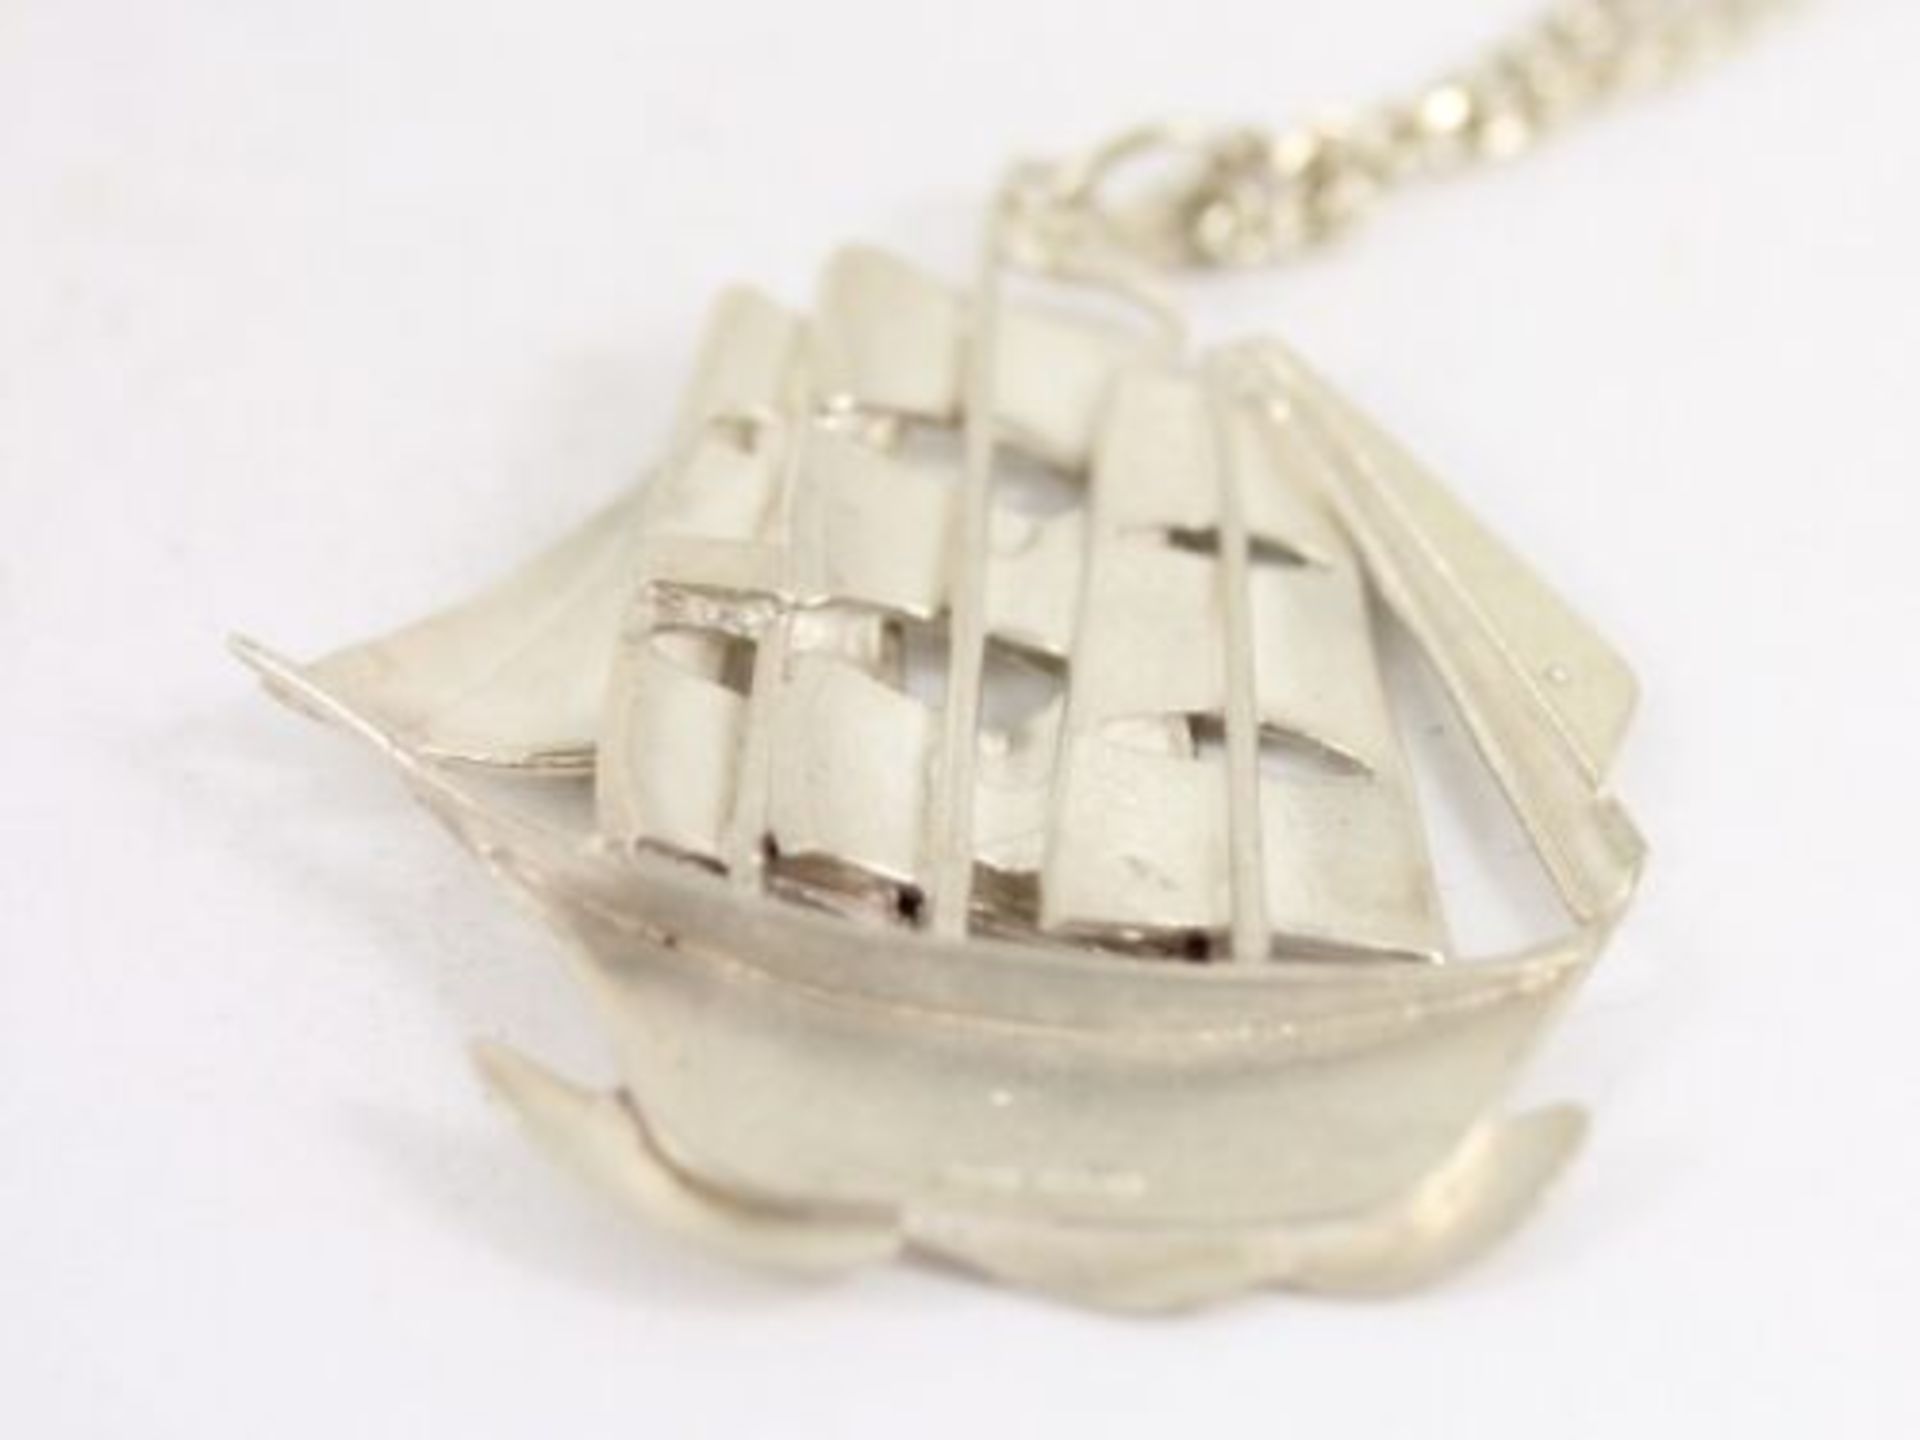 LARGE SHIP PENDANT STERLING SILVER CHAIN NECKLACE 18" SCOTTISH 22.1G 925 BT61 - Image 2 of 4